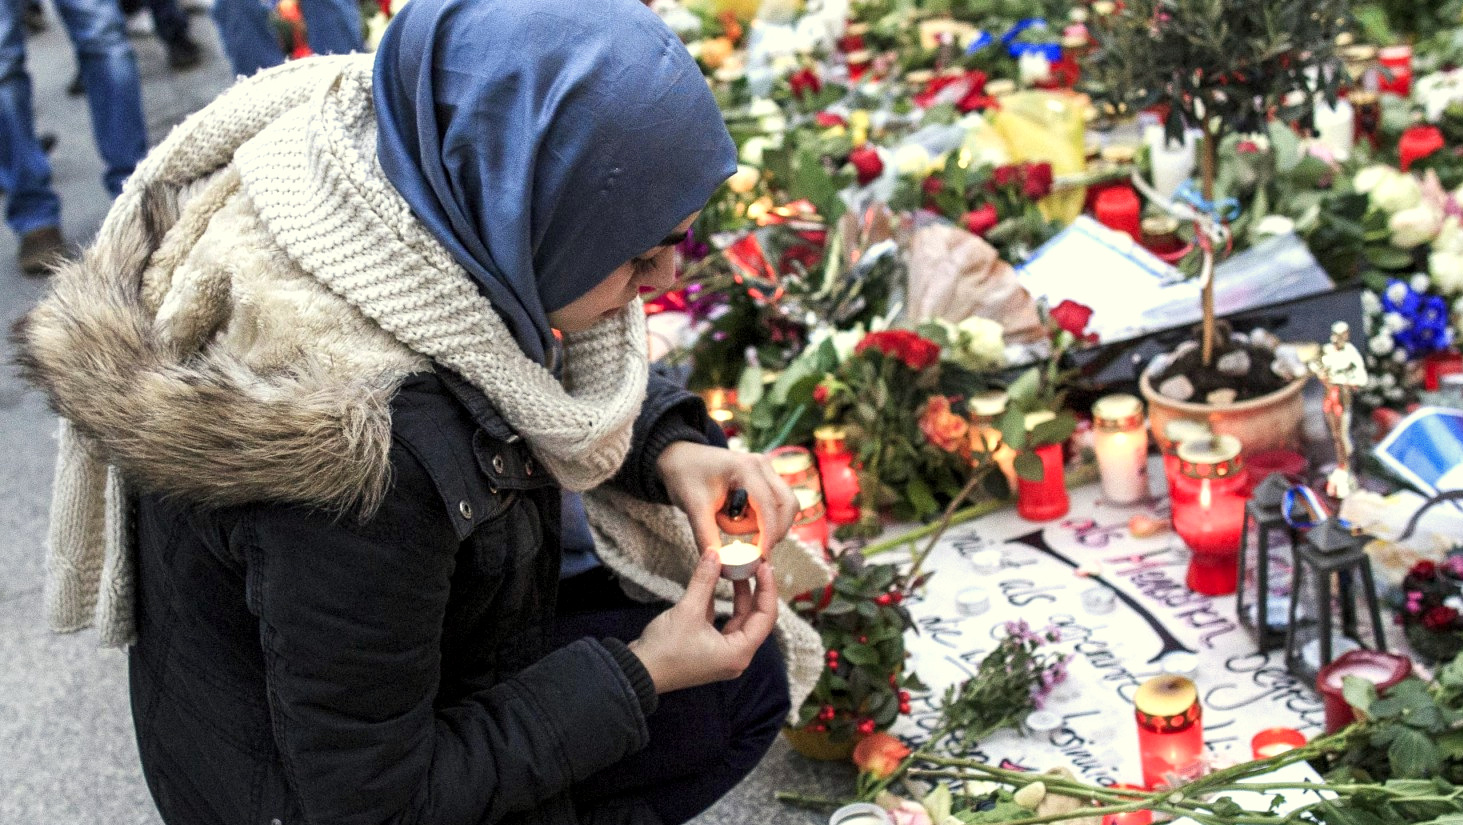 A young woman lights a candle outside the French Embassy in Berlin.